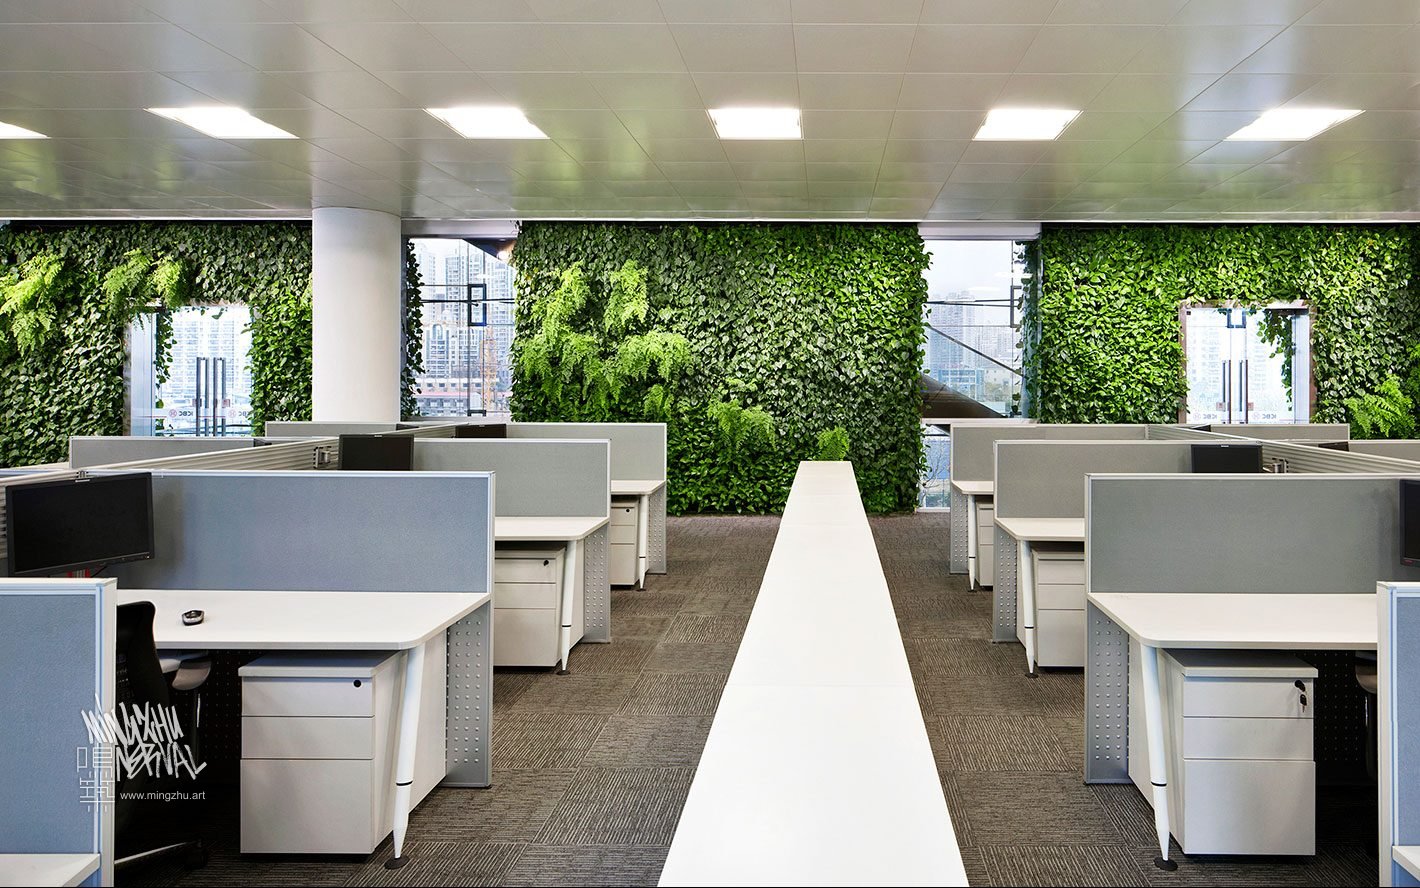 At Mingzhu Nerval, we thrive at creating the most beautiful vertical gardens in the world. For ICBC, we created a healthy nature workspace design - Shanghai, 2012.